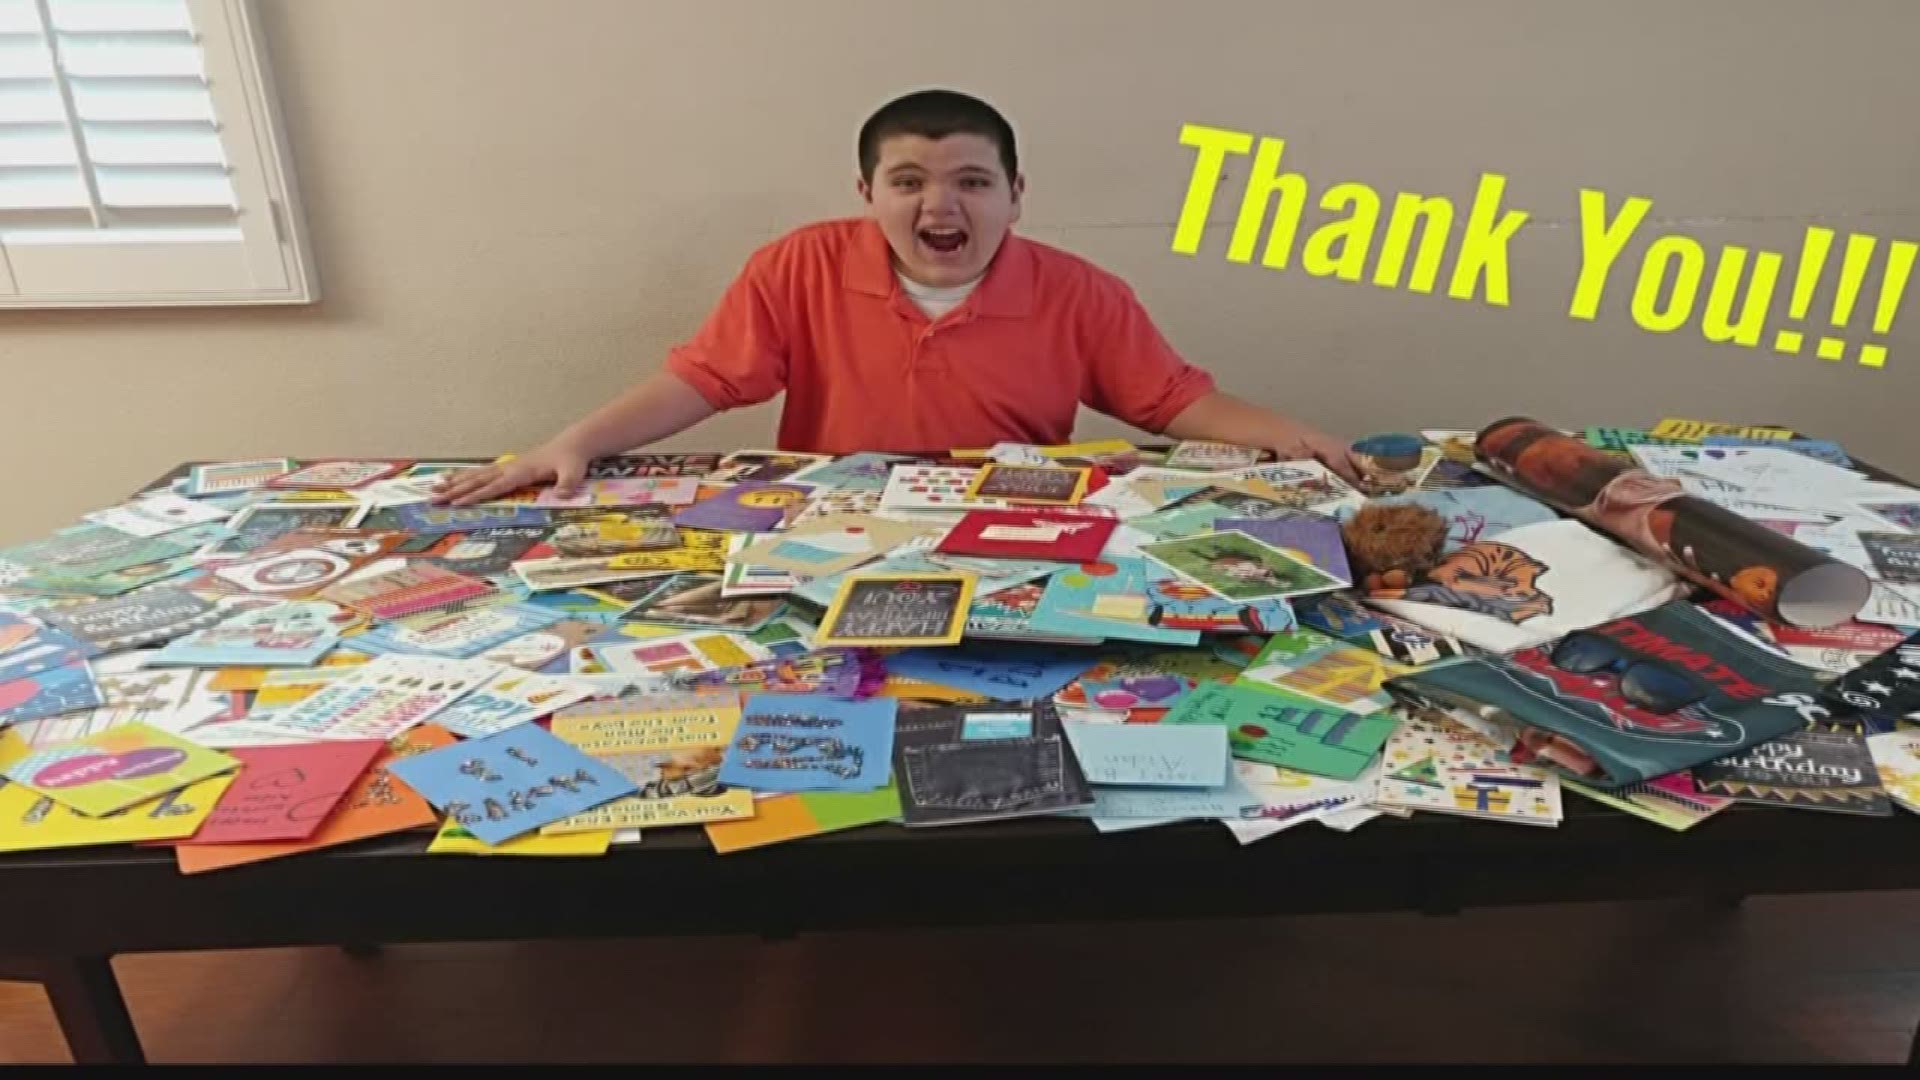 His mother made a Facebook post in a local autism support group asking for birthday cards to help support her son. She said she thought he would receive about 10 or 20. (Jan. 29, 2018)